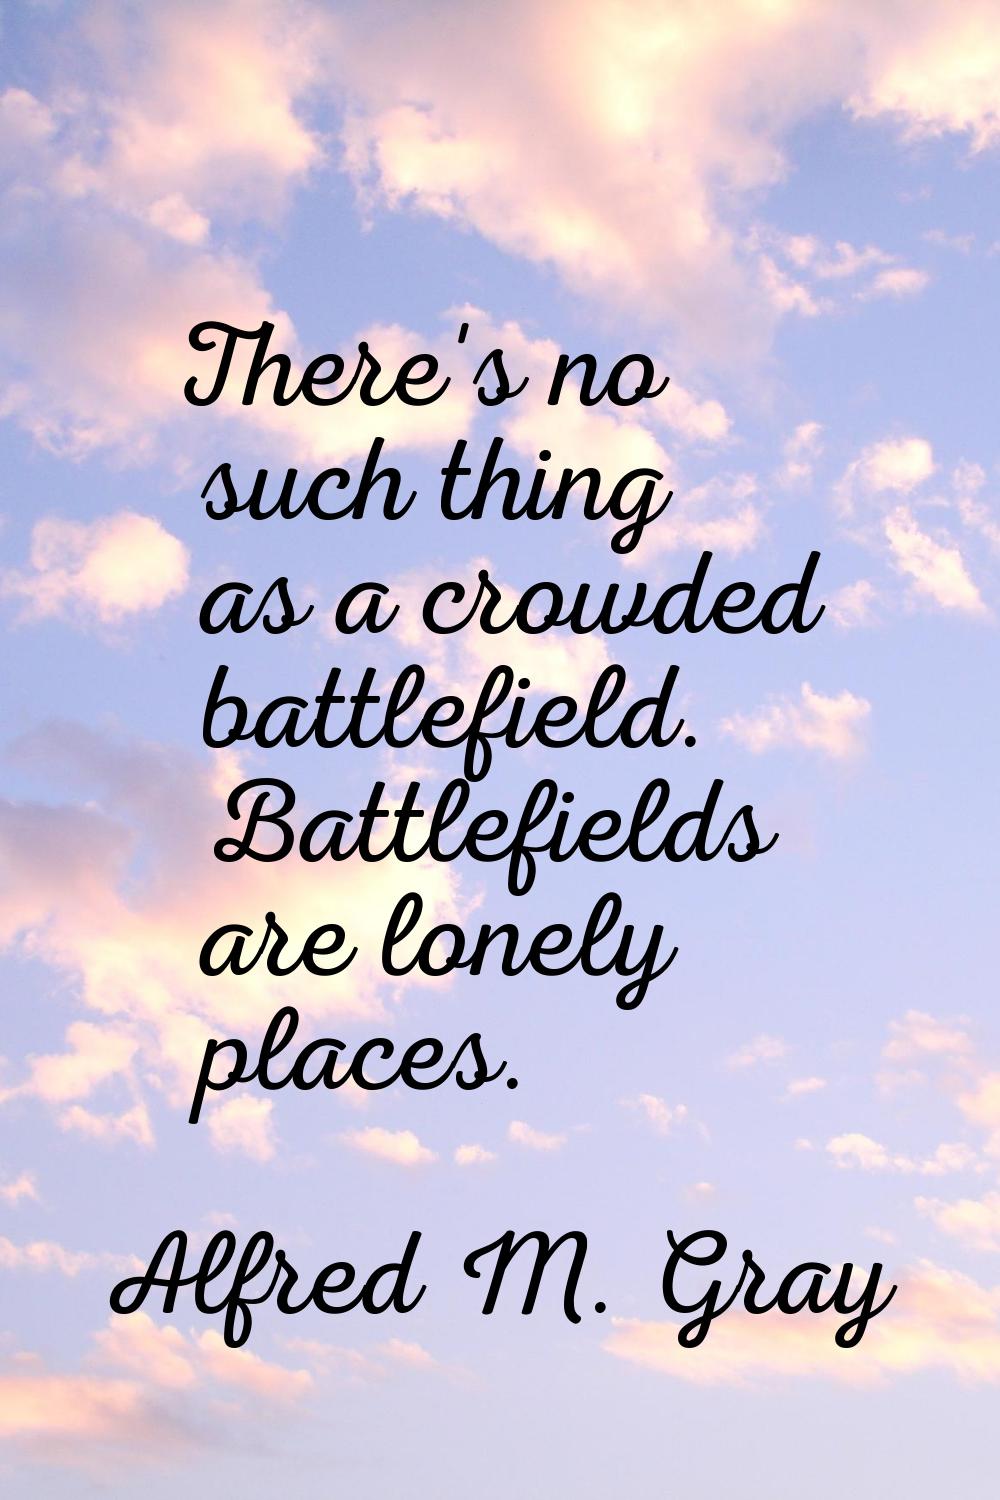 There's no such thing as a crowded battlefield. Battlefields are lonely places.